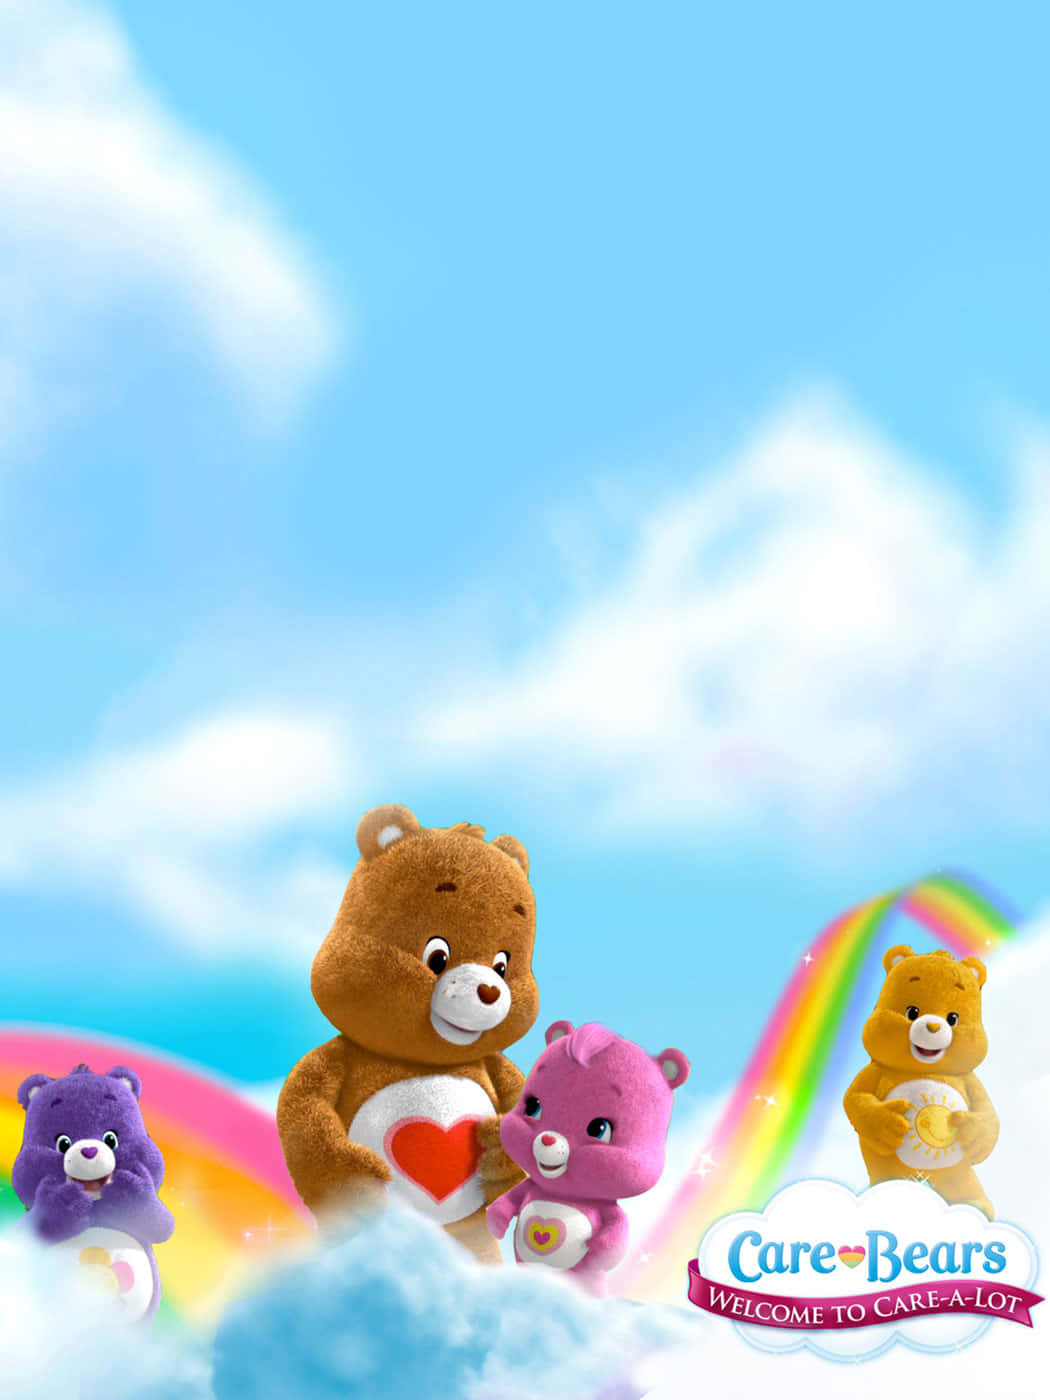 From the Care Bears to You!